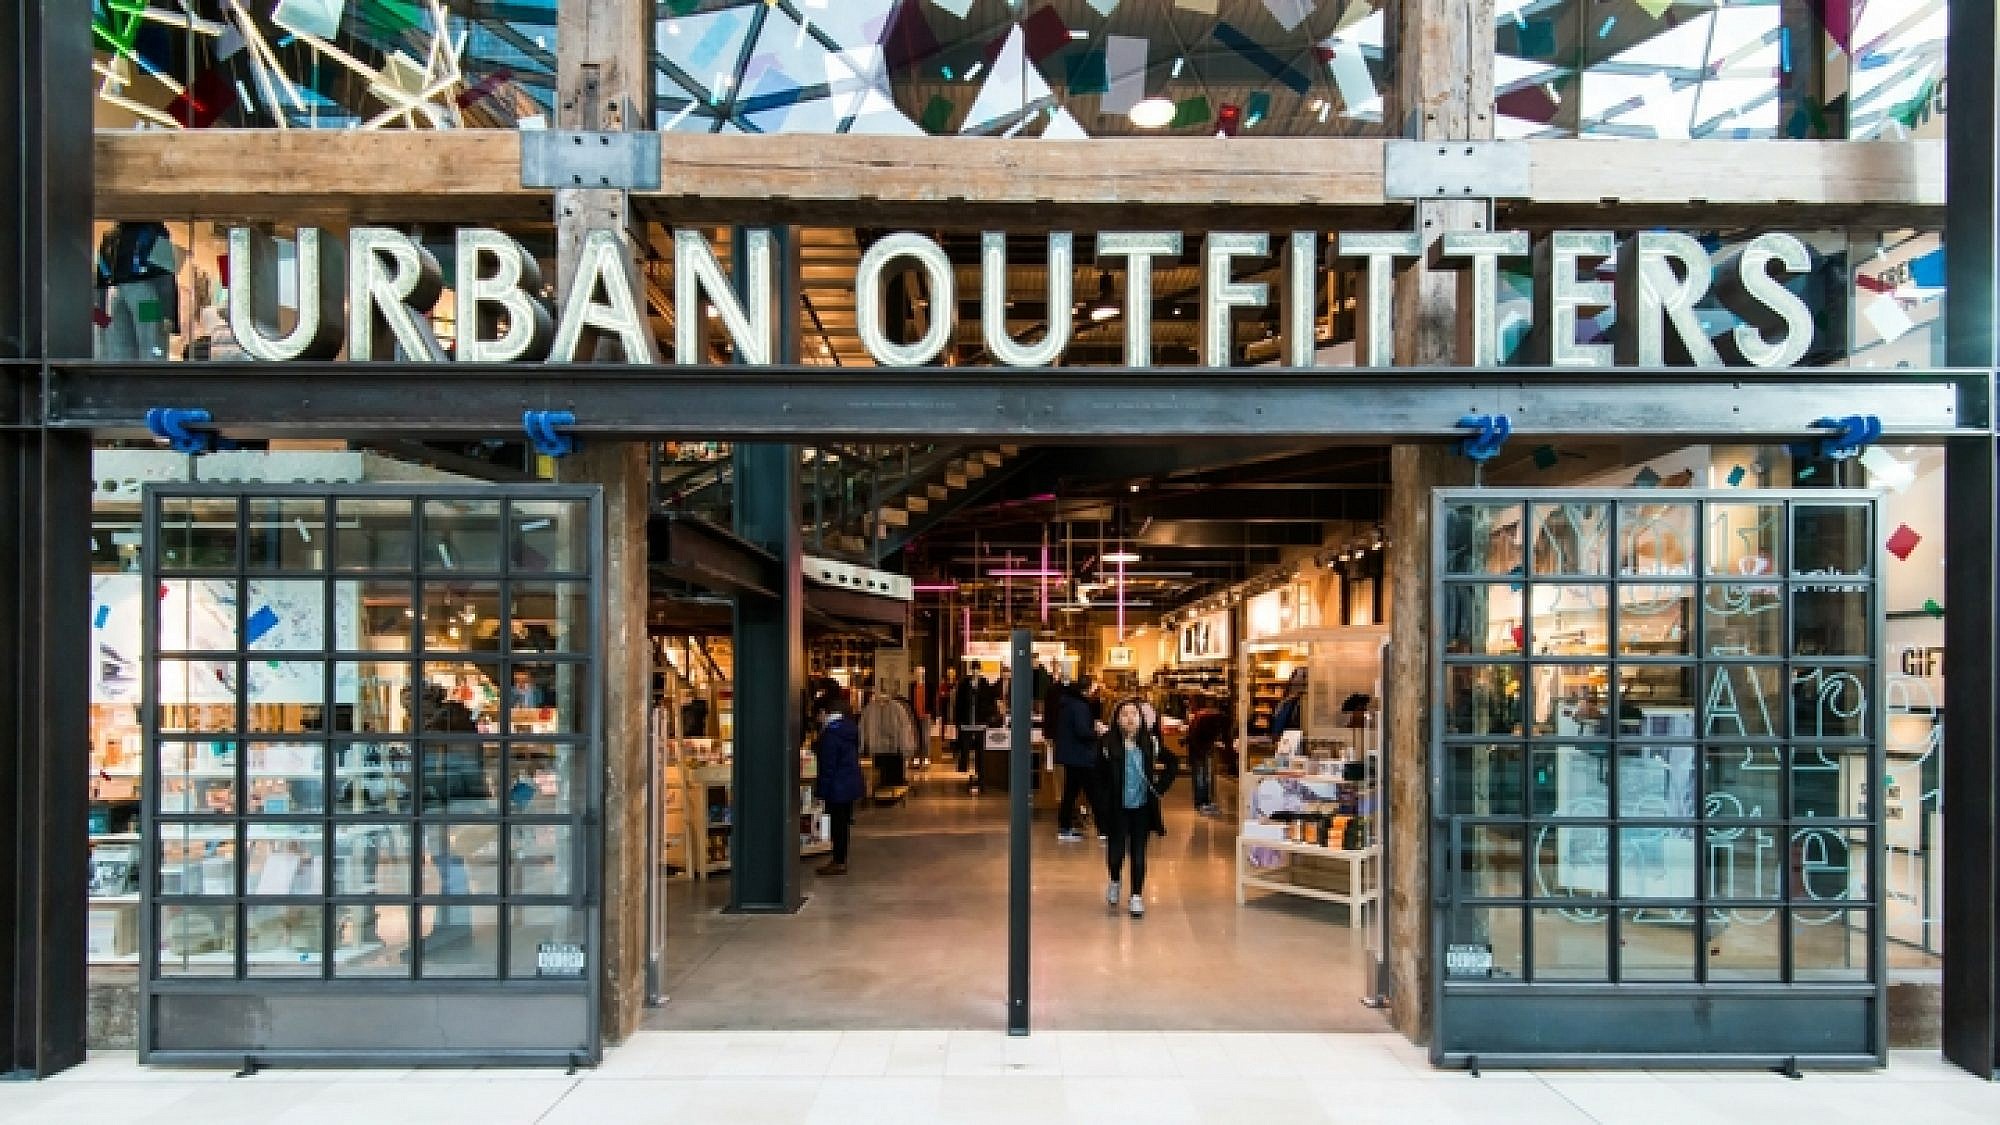 urban outfitters אורבן אאוטפיטרס | צילום: shutterstock